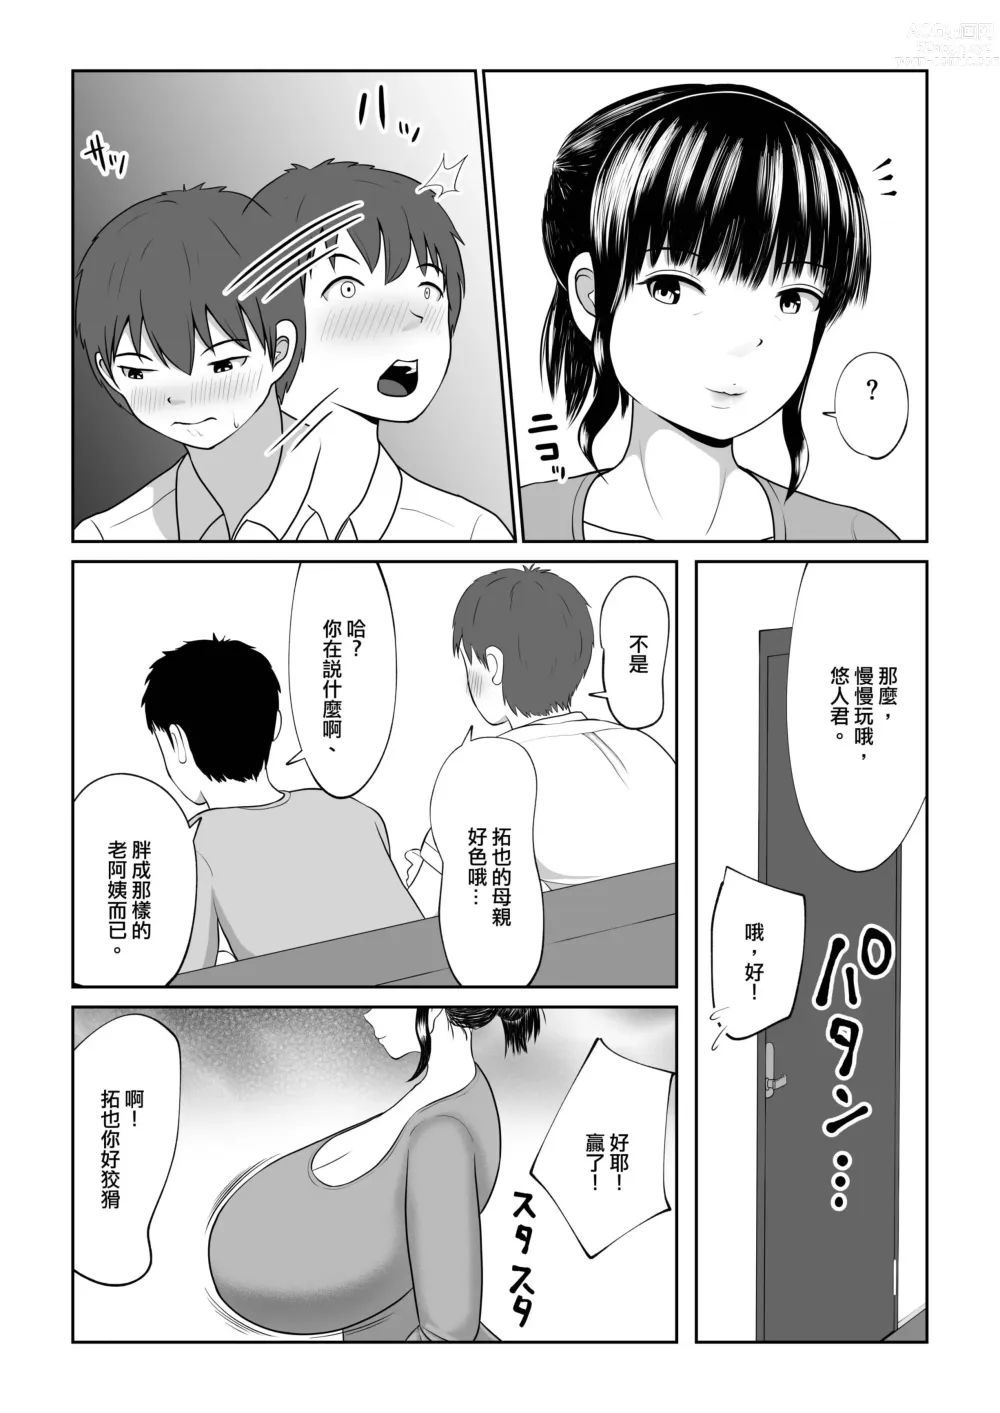 Page 4 of doujinshi 被朋友的母親乳交的故事